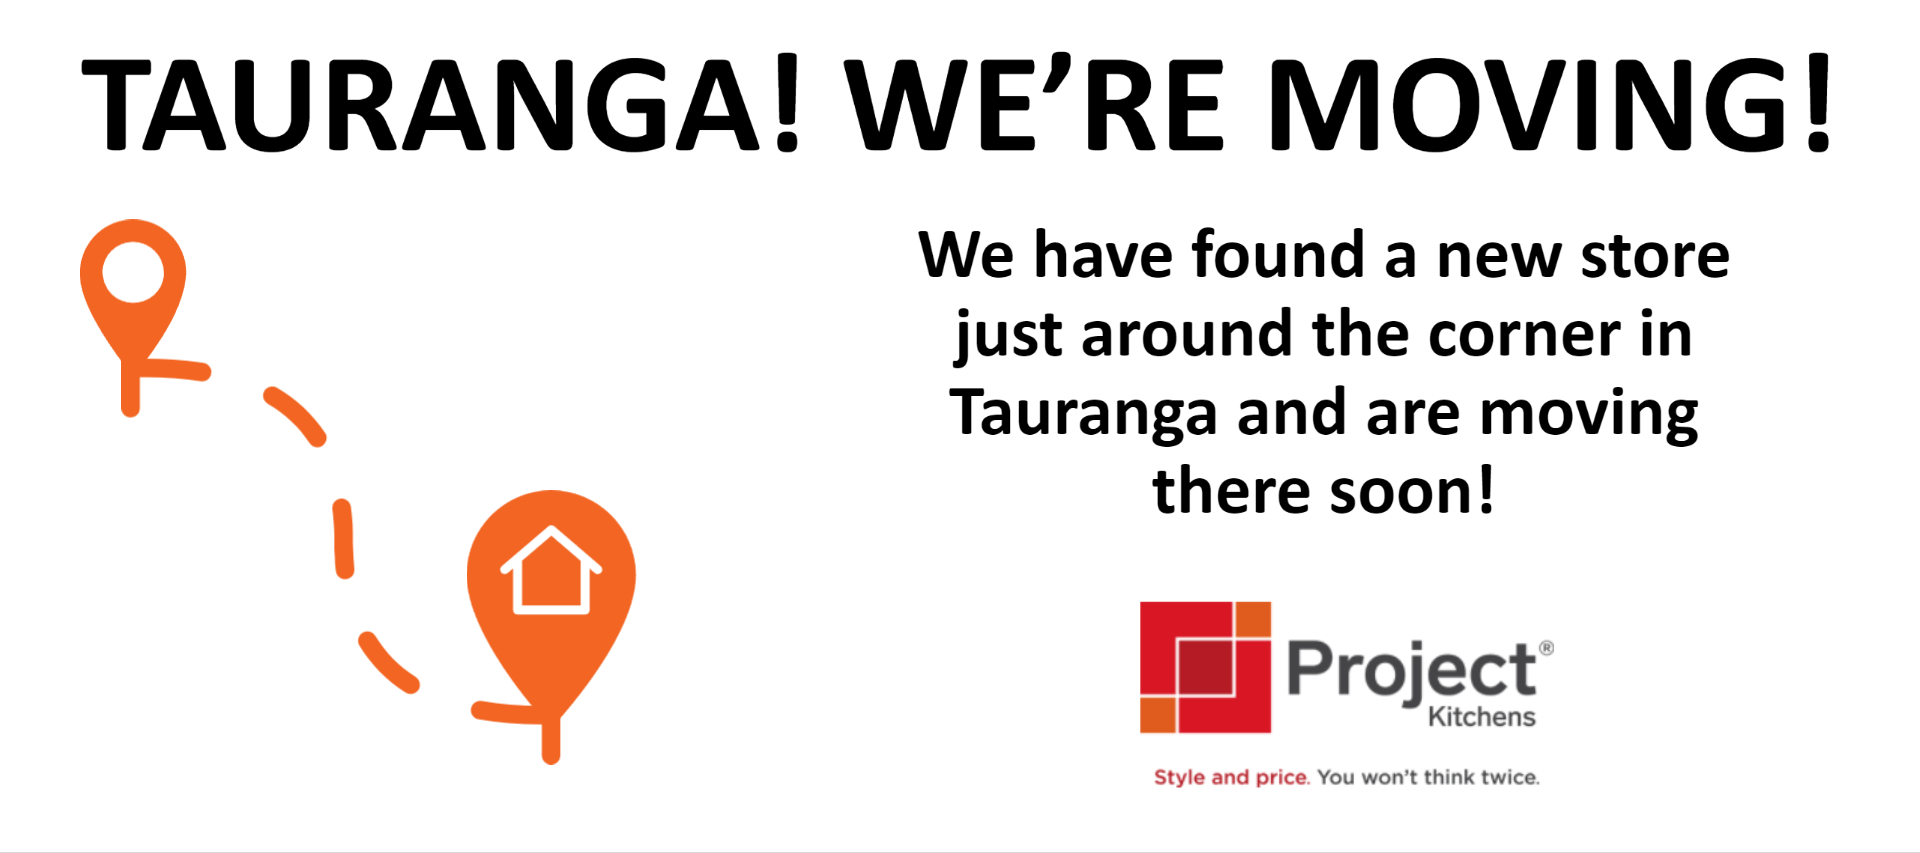 Our Tauranga Store is Moving just around the corner